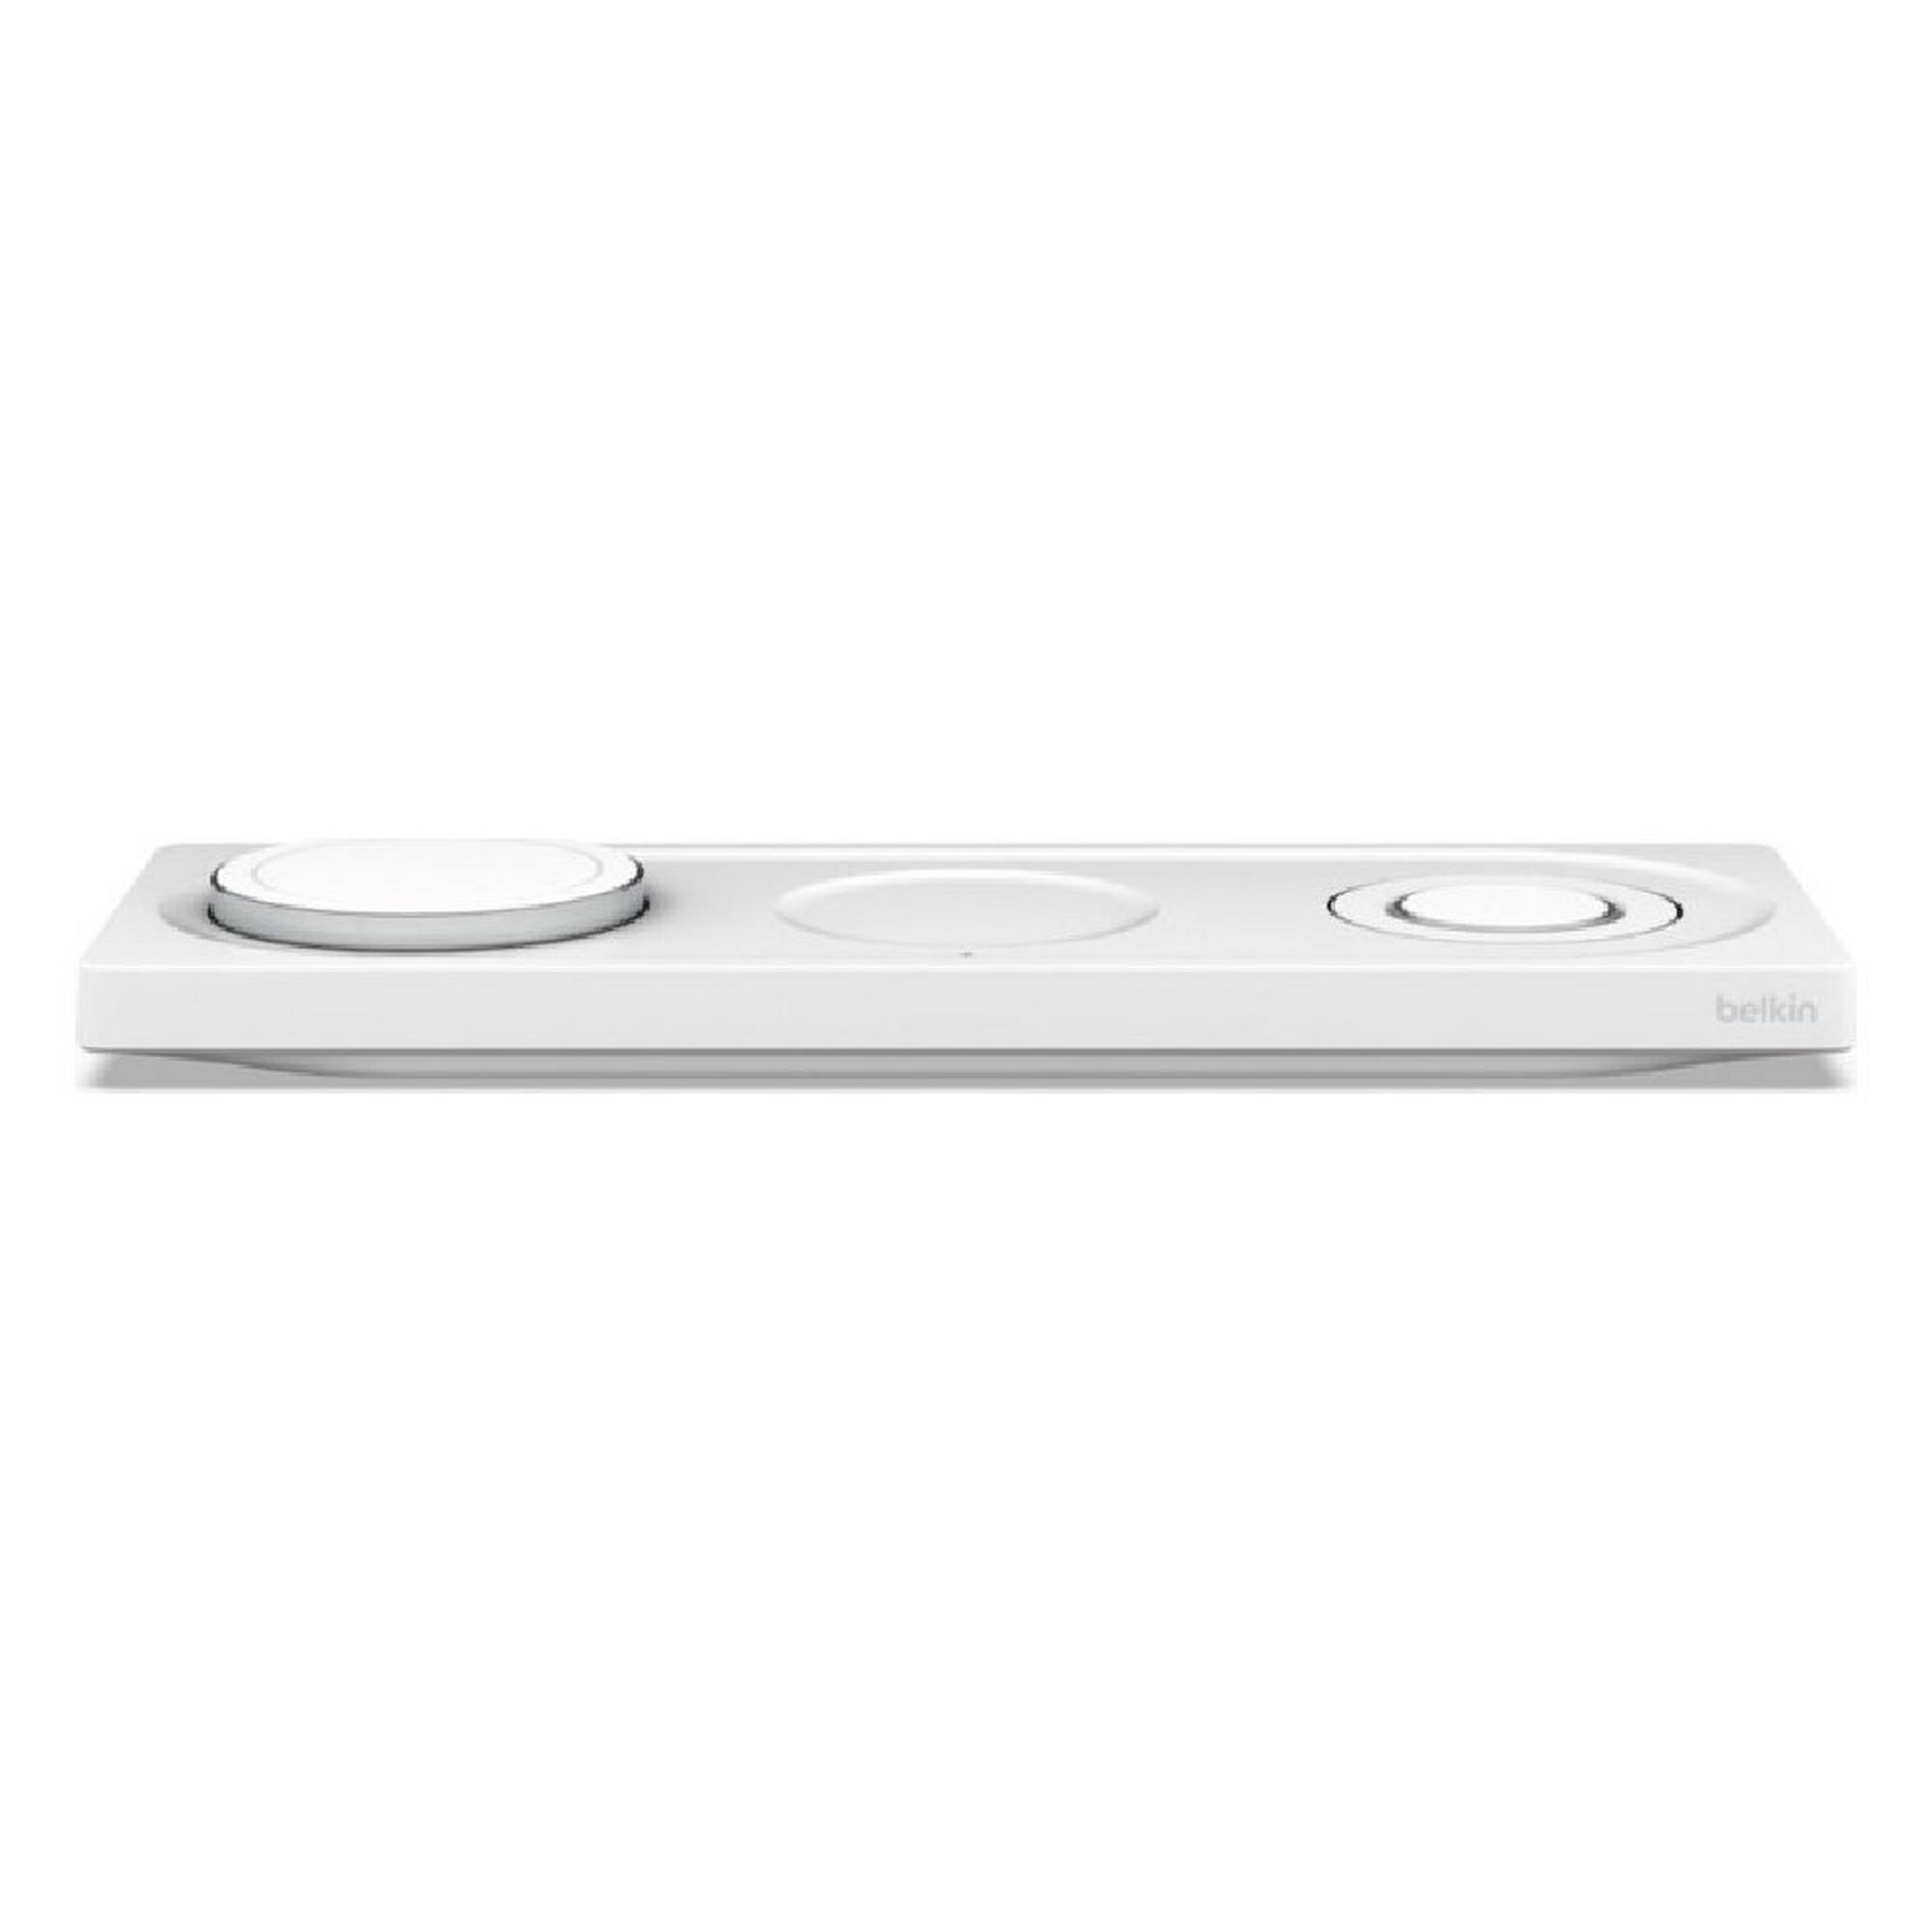 Belkin 3-in-1 Wireless Charging Pad with MagSafe - White